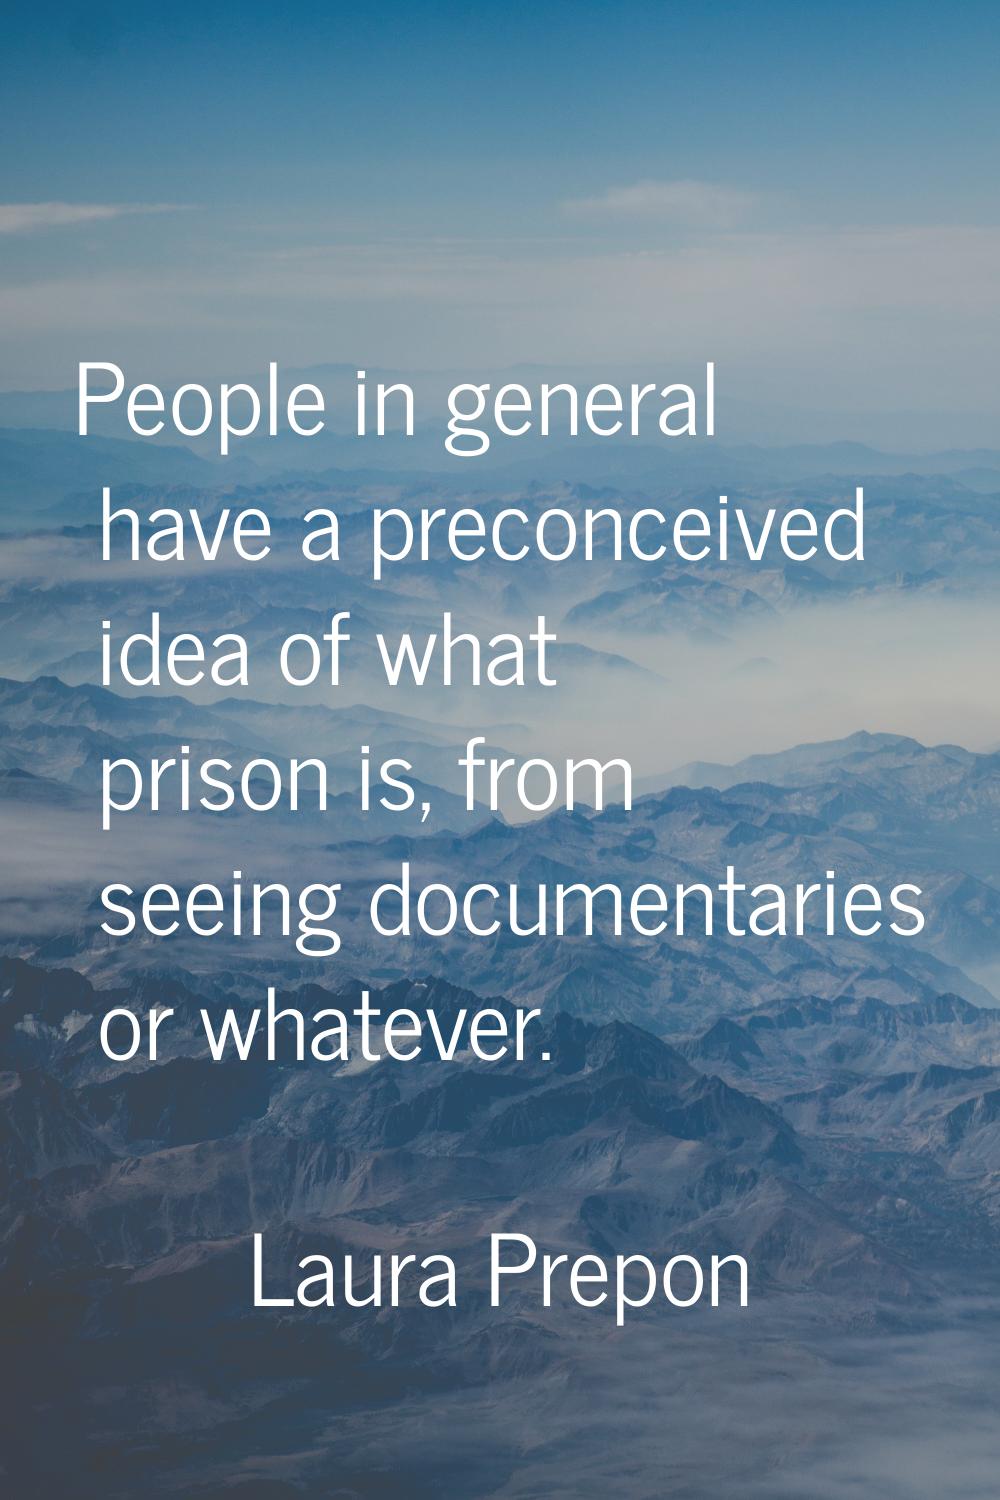 People in general have a preconceived idea of what prison is, from seeing documentaries or whatever